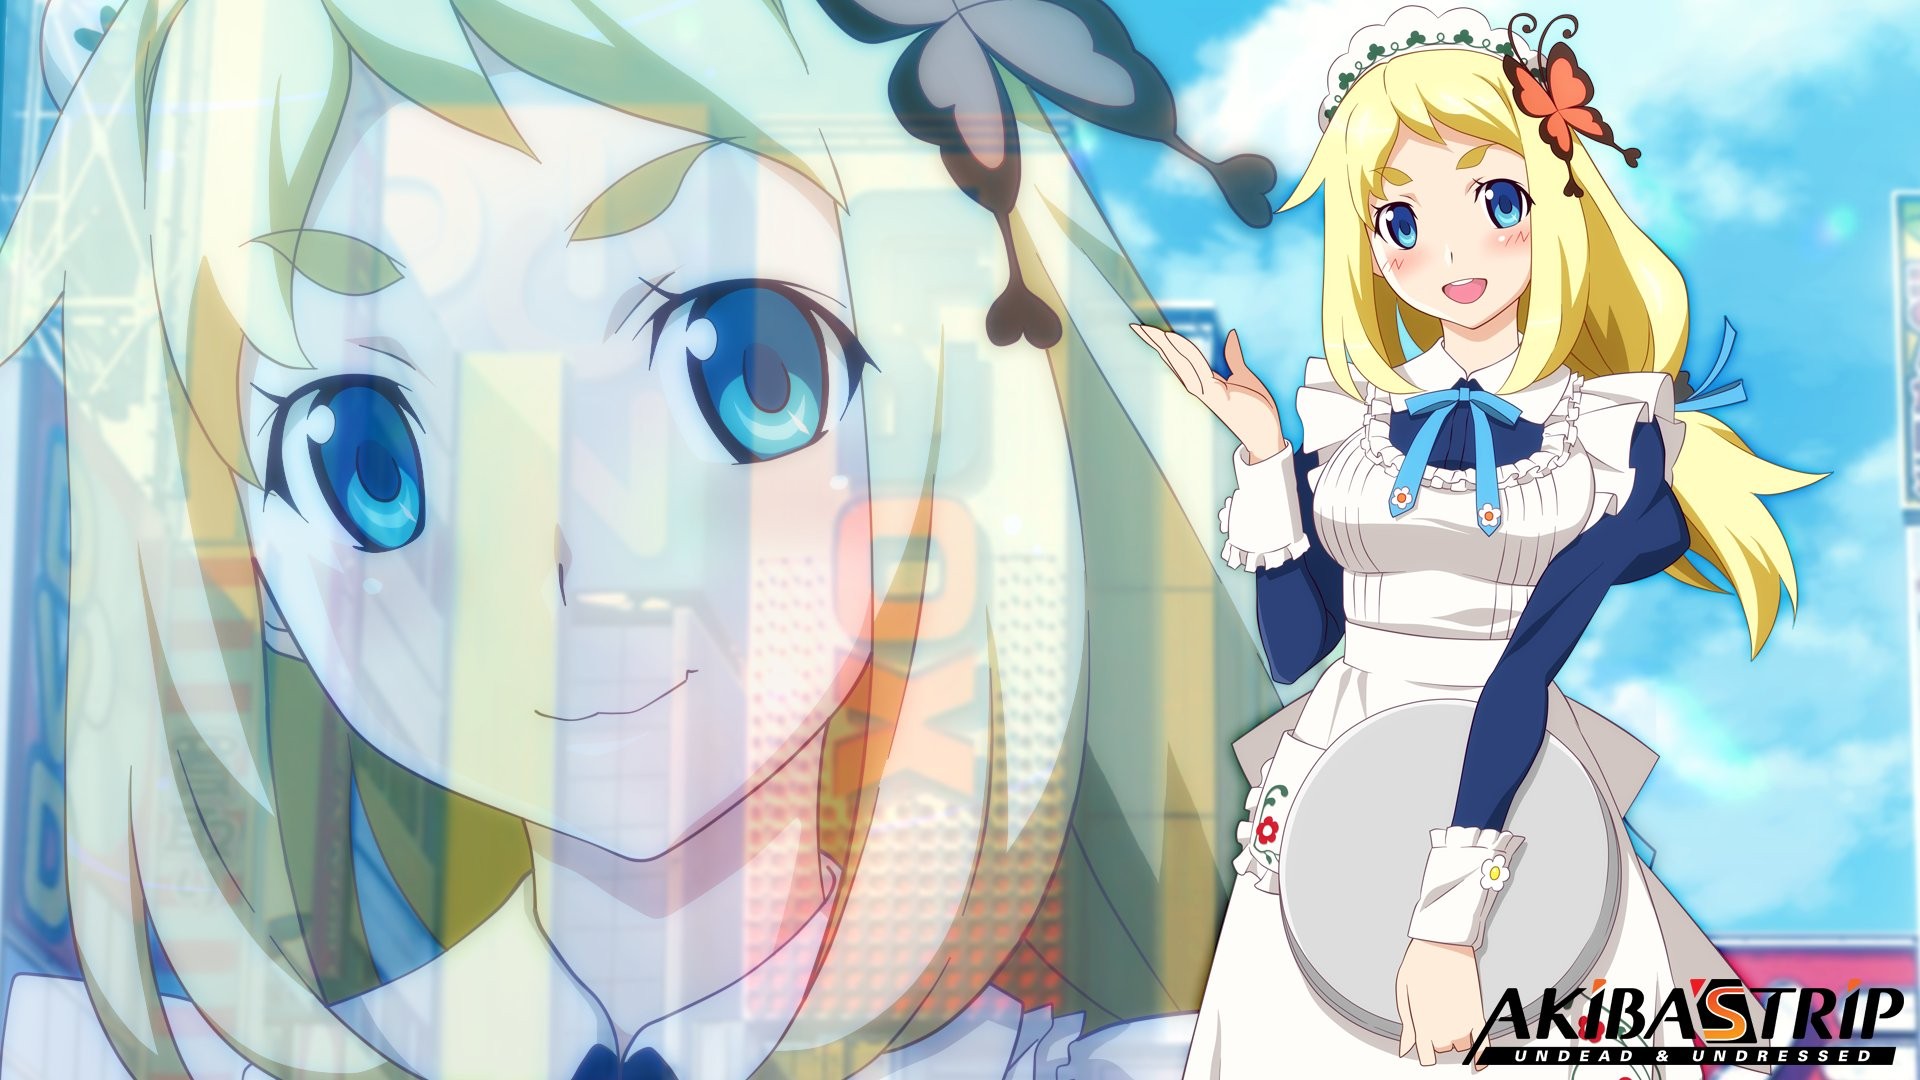 Anime 1920x1080 Akiba's Trip video games anime maid outfit smiling blonde blue eyes